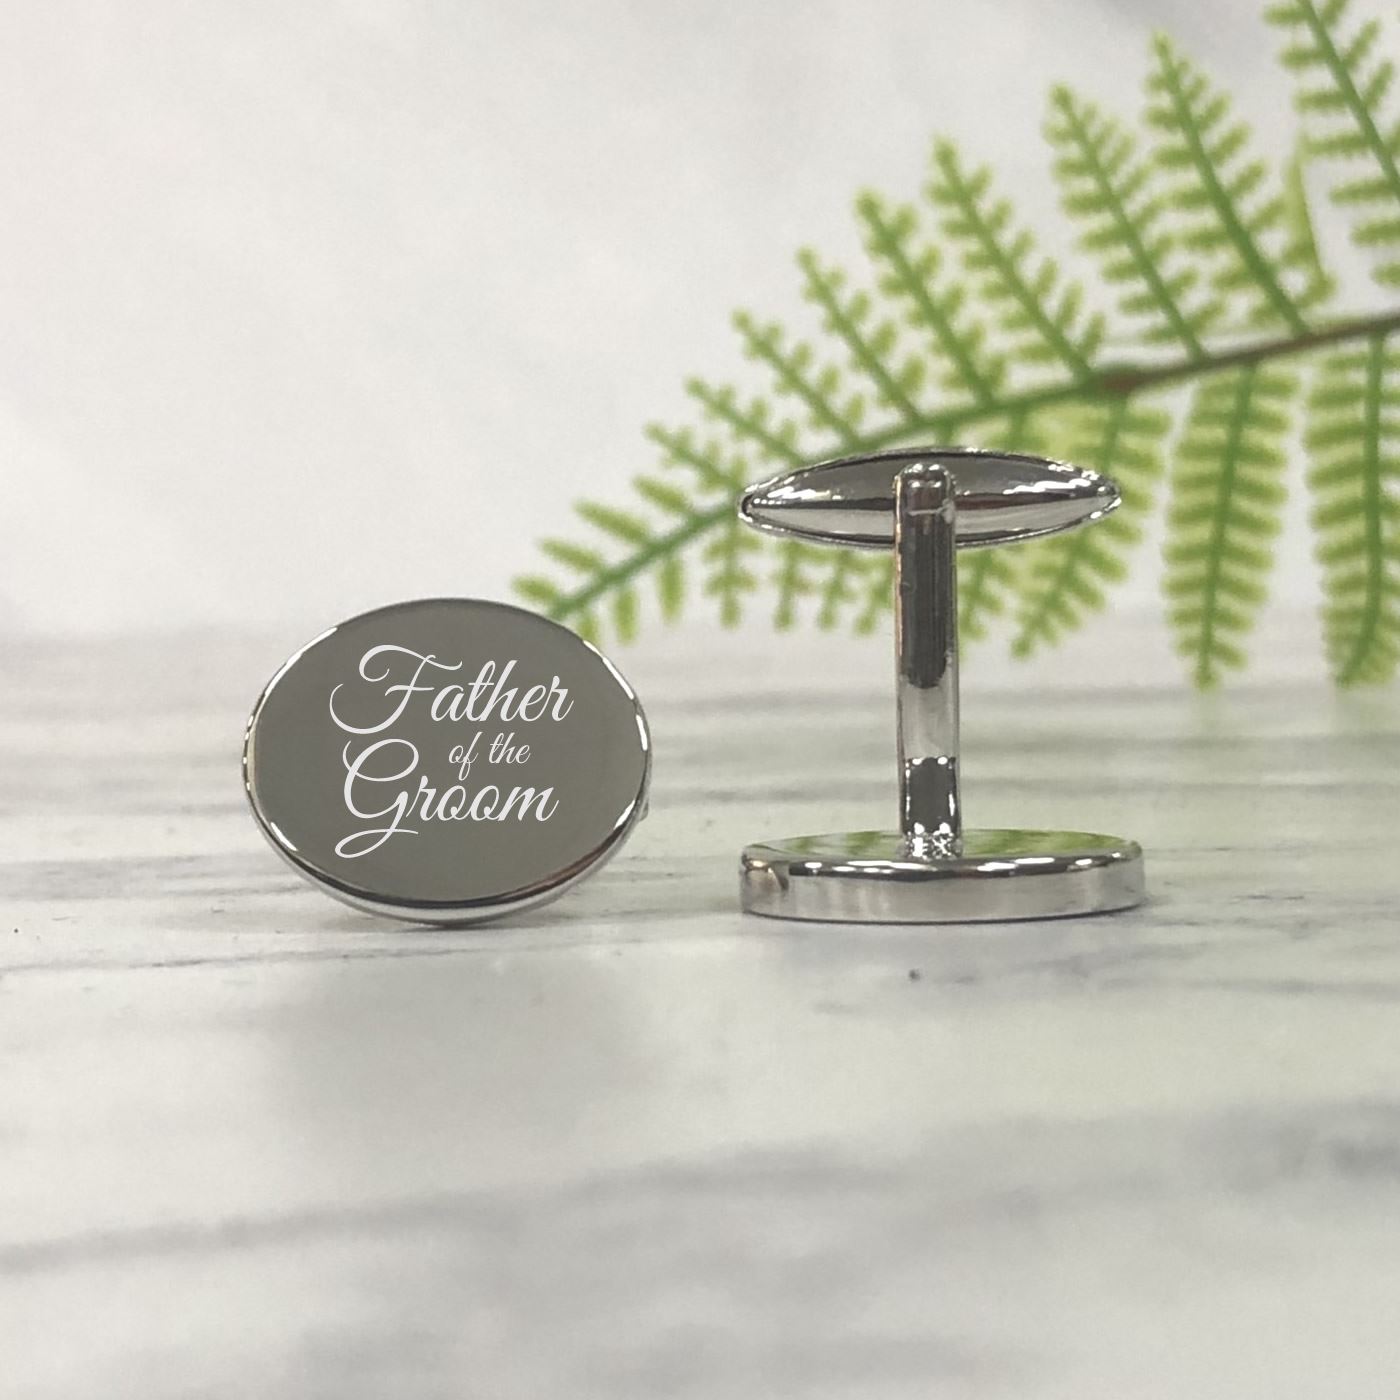 Engraved Wedding Day Oval Cufflinks - Father of the Groom